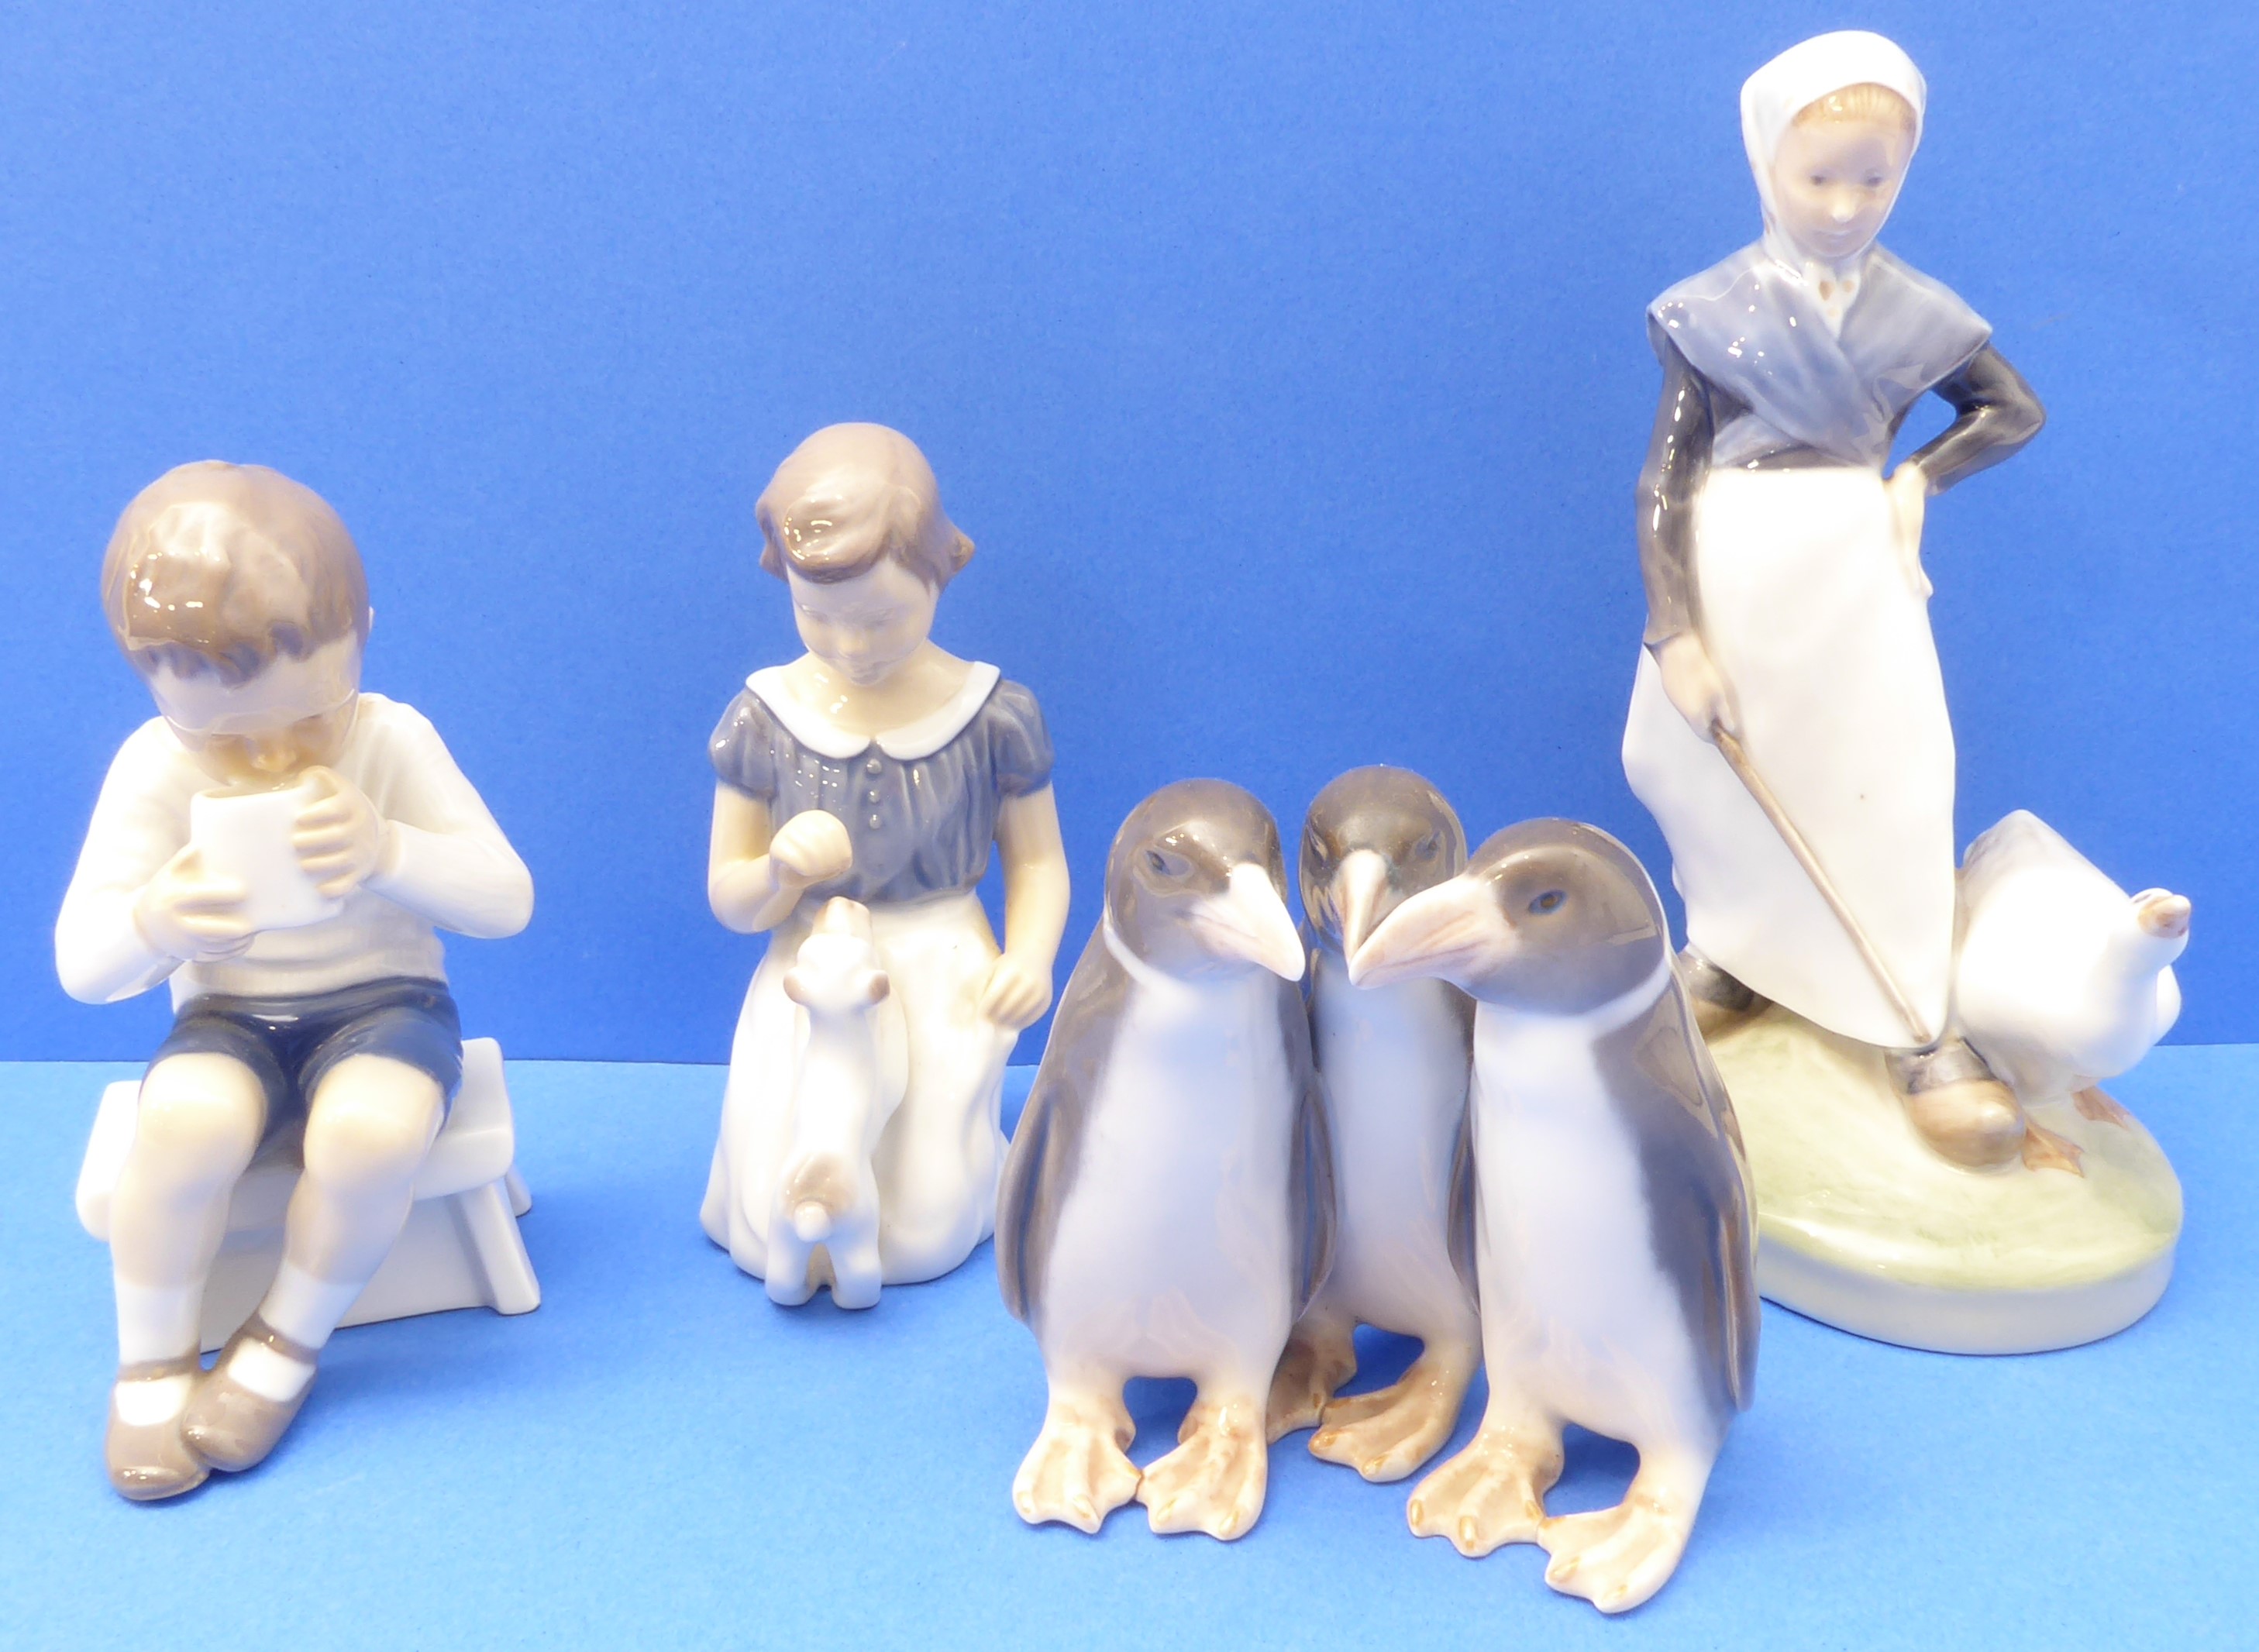 Four mid-20th century Royal Copenhagen porcelain figures (Danish factory): a young girl with